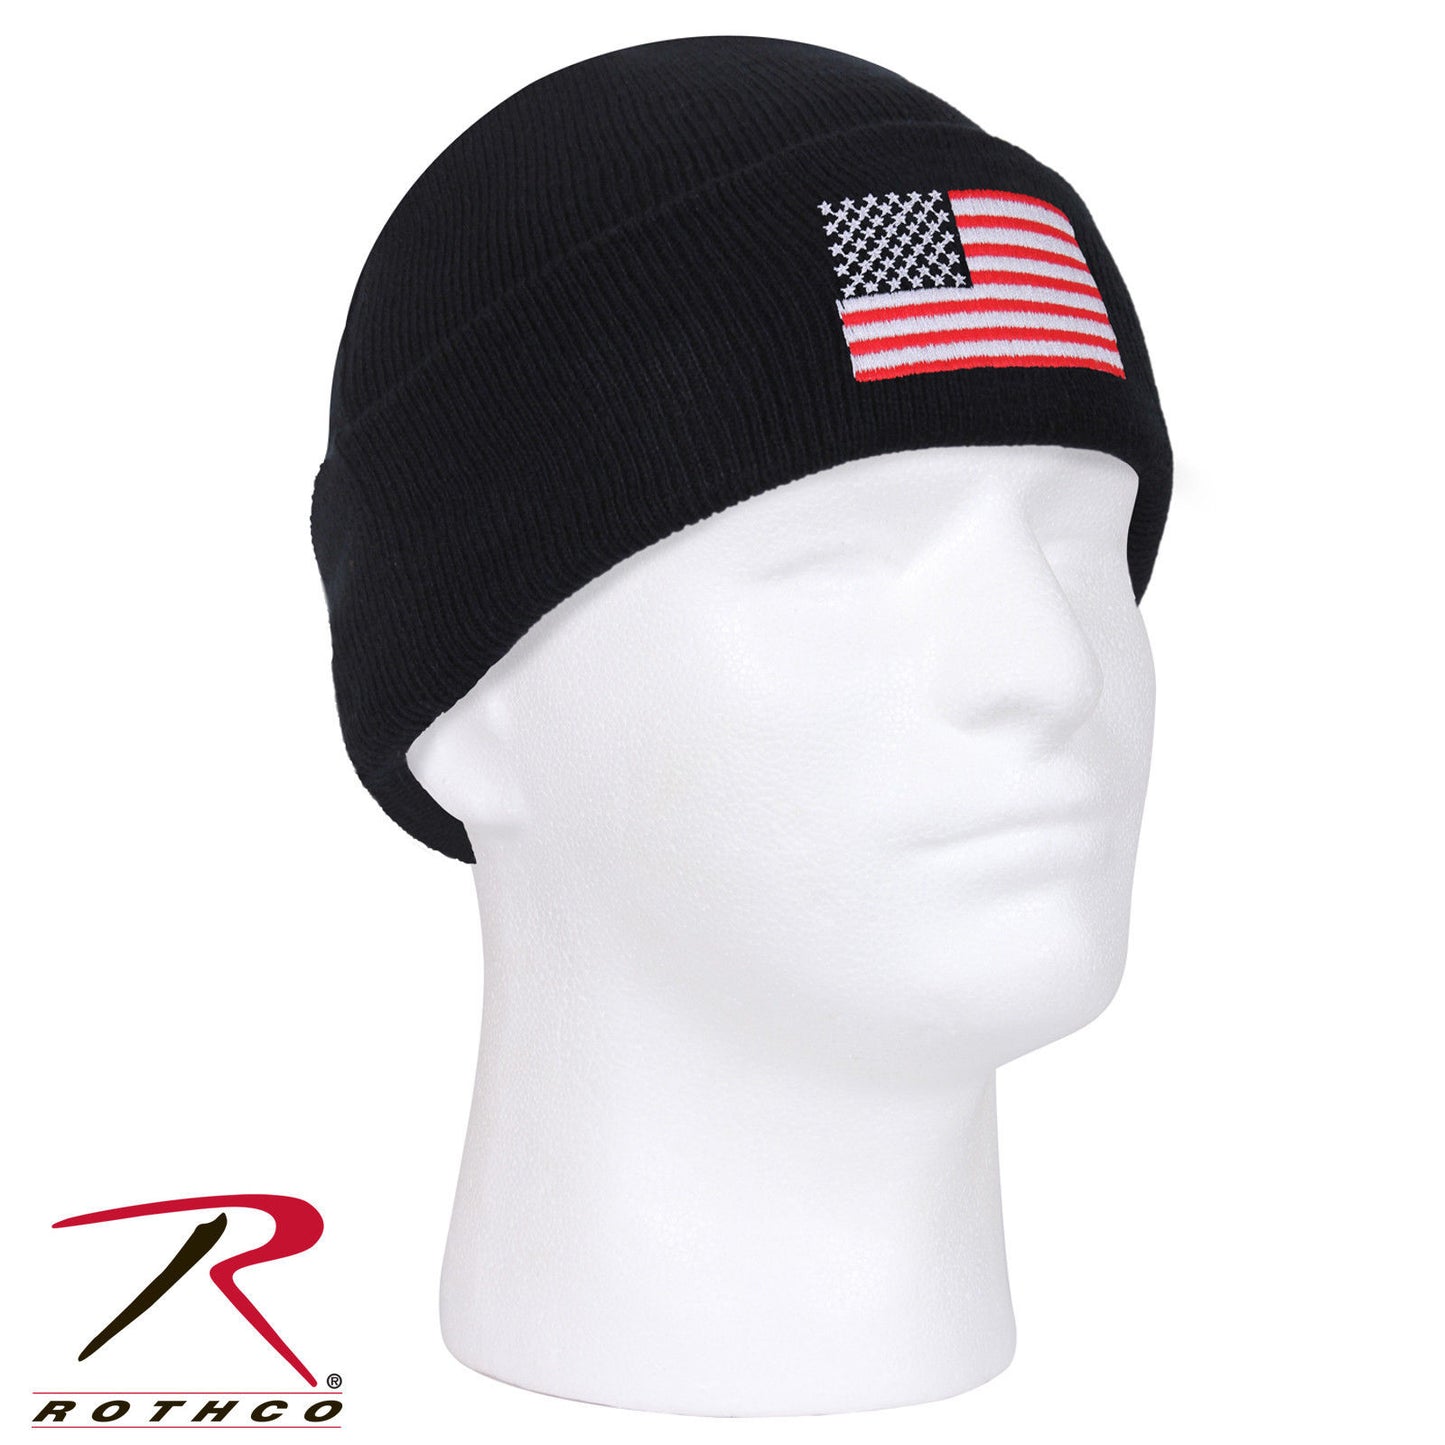 Rothco US Flag Embroidered Watch Cap - 100% Acrylic Winter Hat w/ American Flag